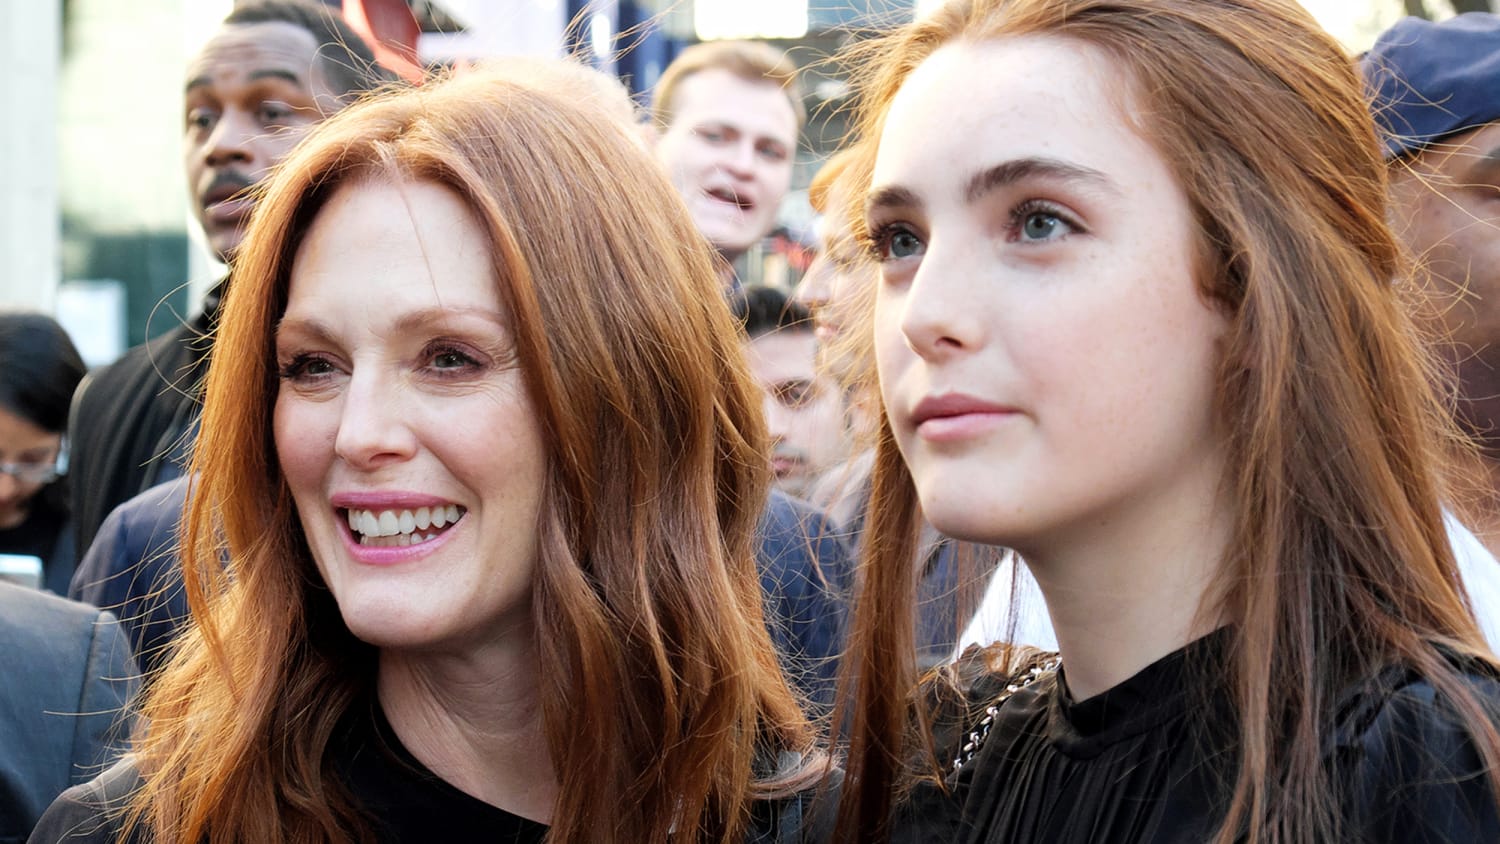 This is Julianne Moore's beauty advice to her daughter